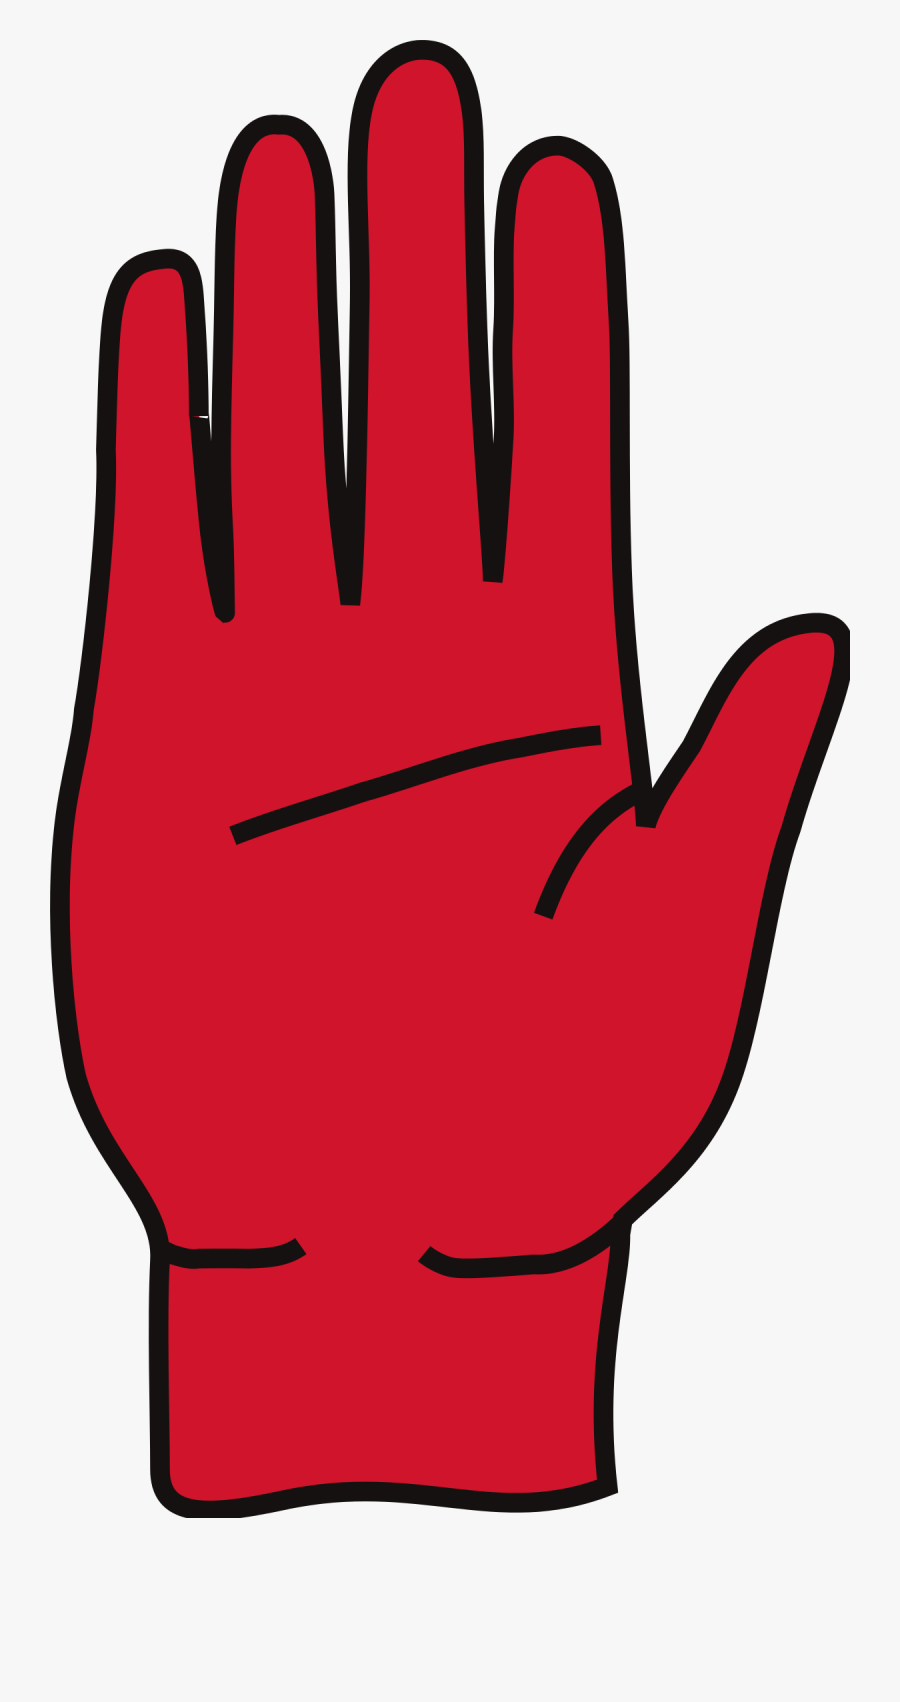 Red Hand Of Ulster Png, Transparent Clipart